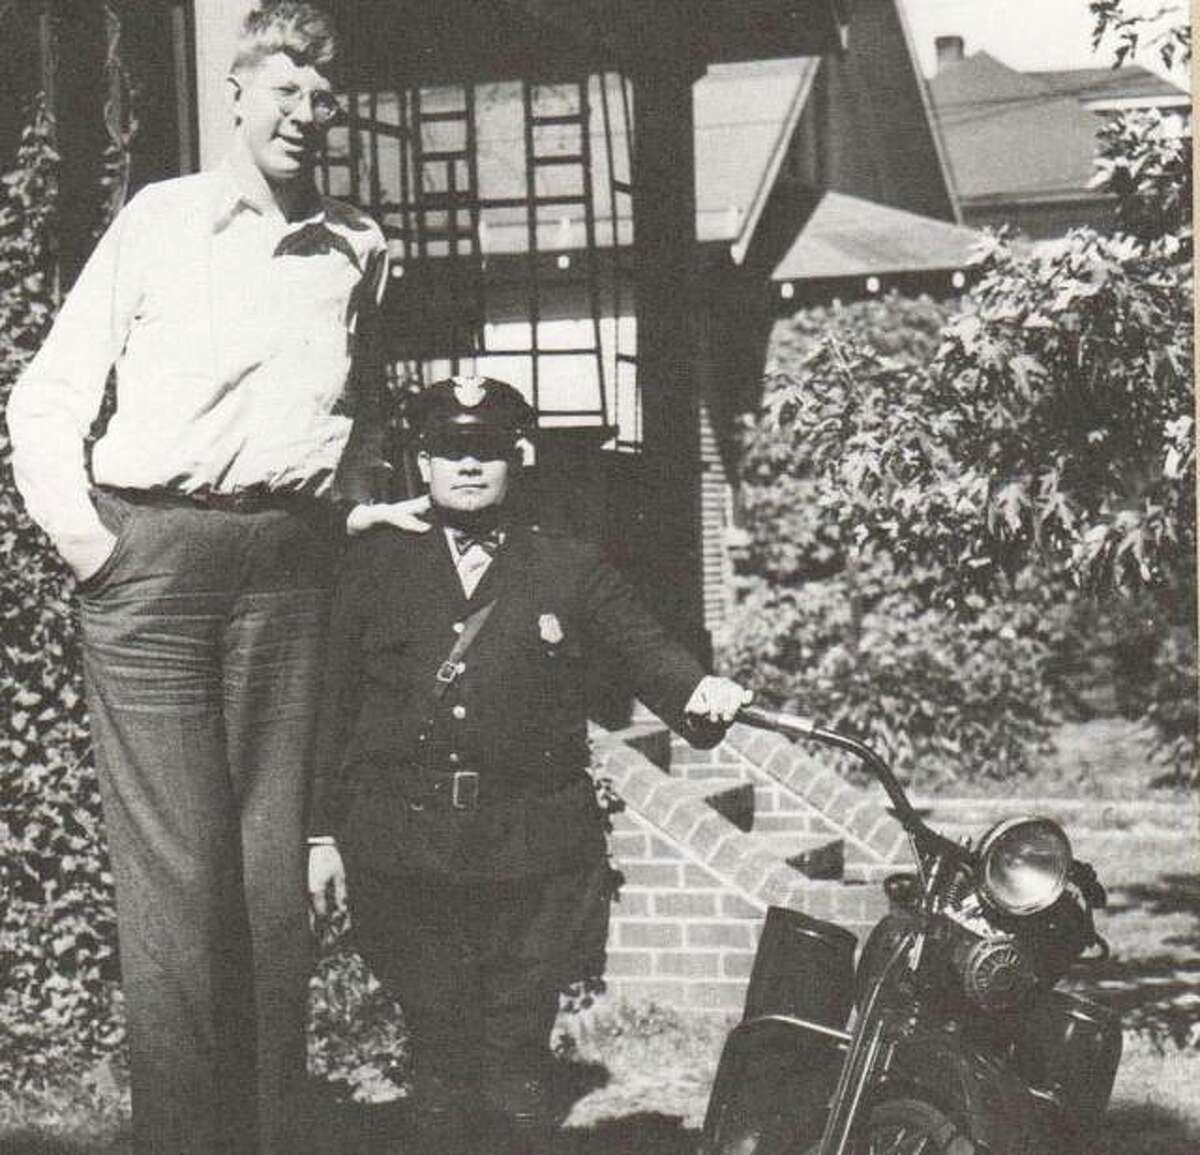 Robert Wadlow was never too busy to pose for a photograph with a friend. Here, Alton Patrolman Louis Waller and Robert show off the new motorcycle. They are standing outside Wadlow’s home on Brown Street in Upper Alton.